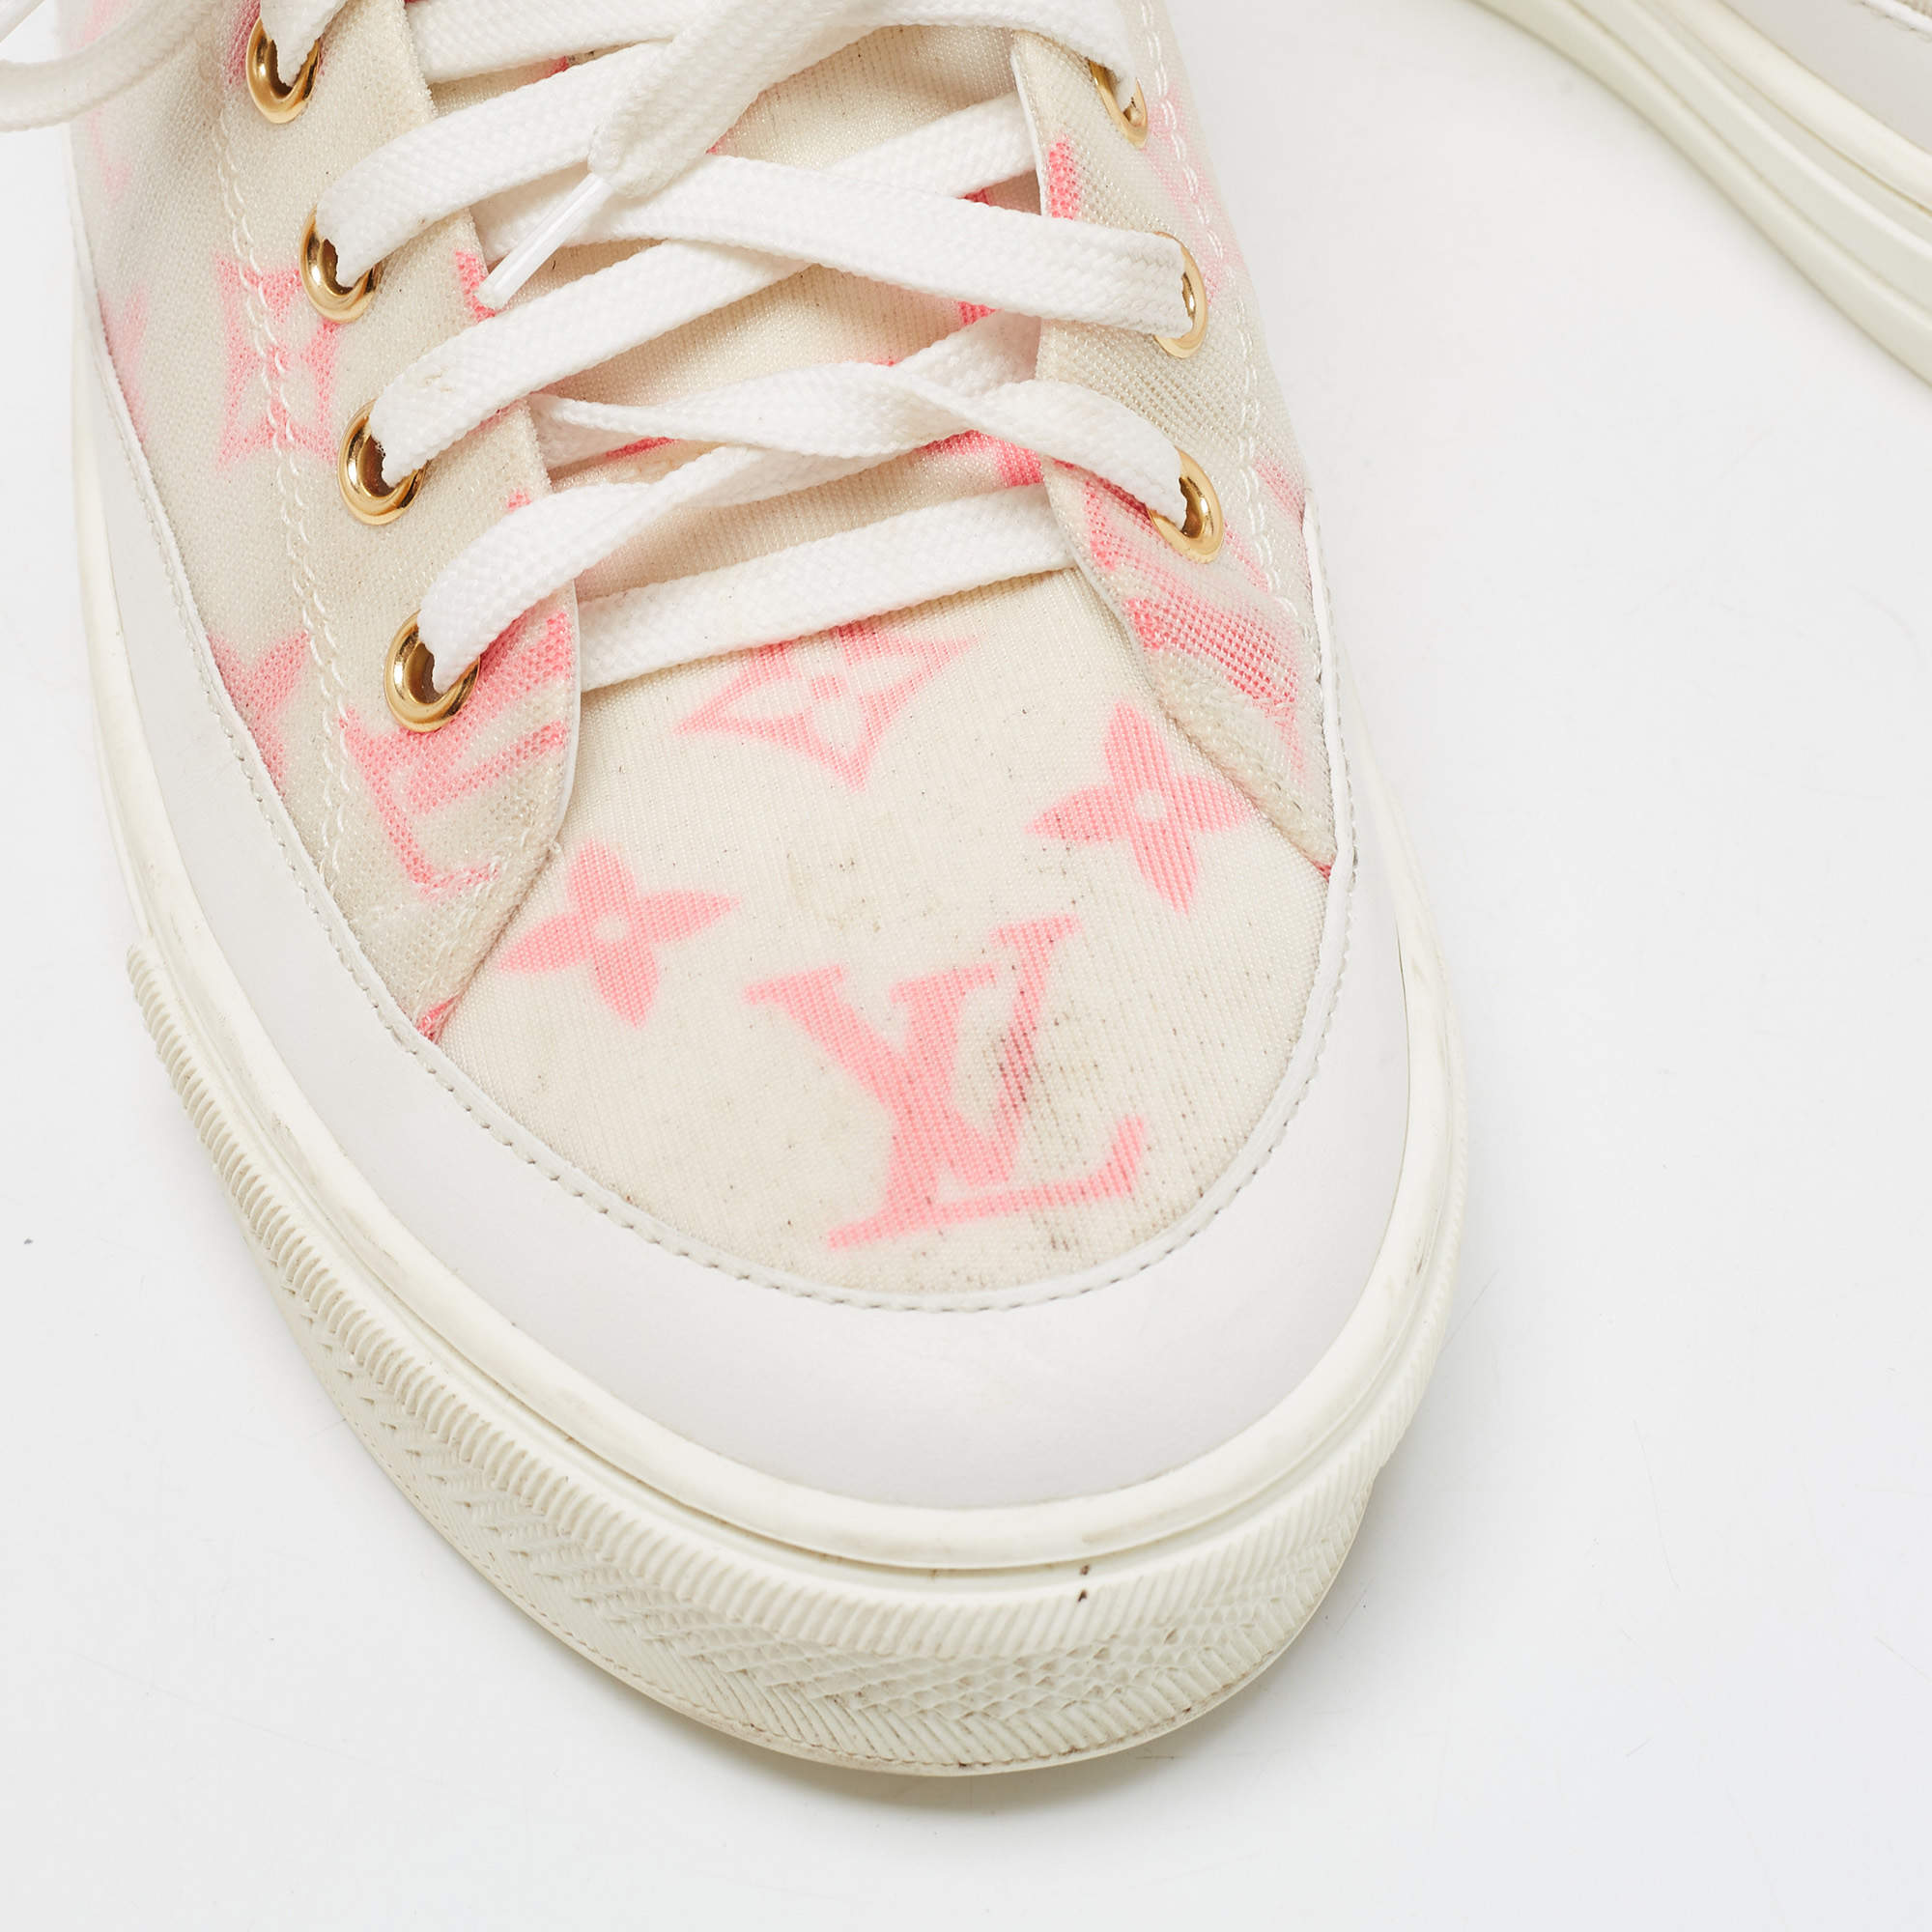 Louis Vuitton White Leather and Monogram Mesh Stellar Mules Sneakers Size 38  at 1stDibs